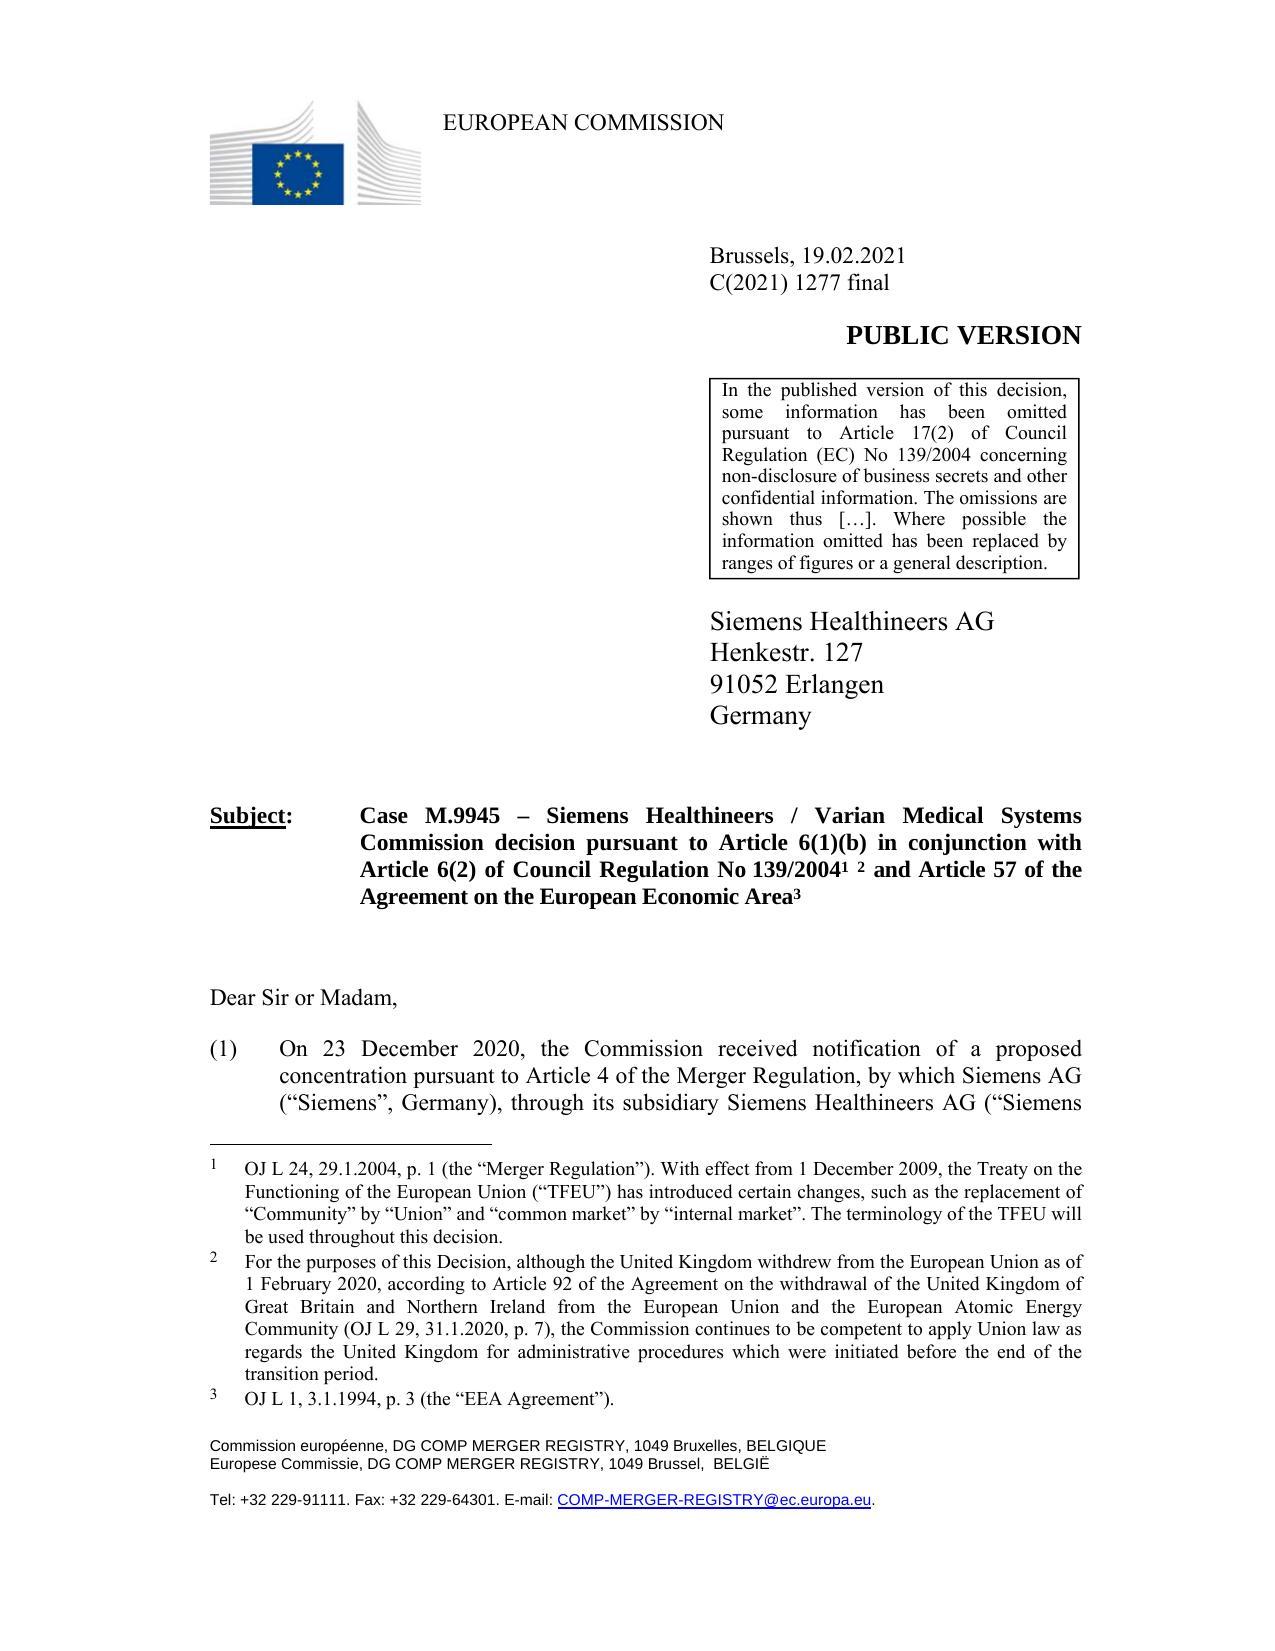 siemens-healthineers-varian-medical-systems-commission-decision.pdf